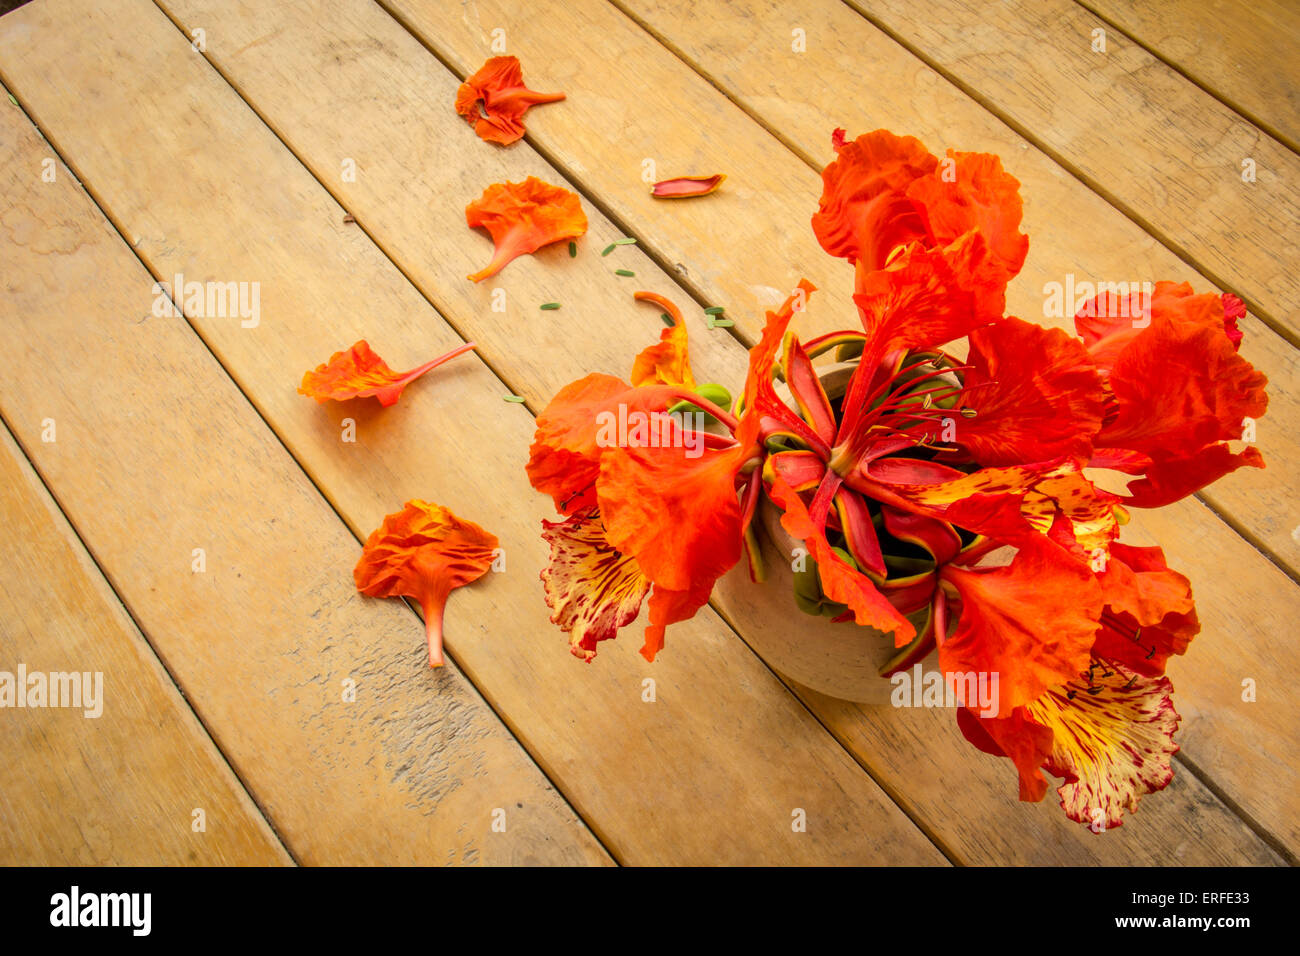 Orange flowers, old wooden floors, wooden tables, warm vintage wilted. Stock Photo